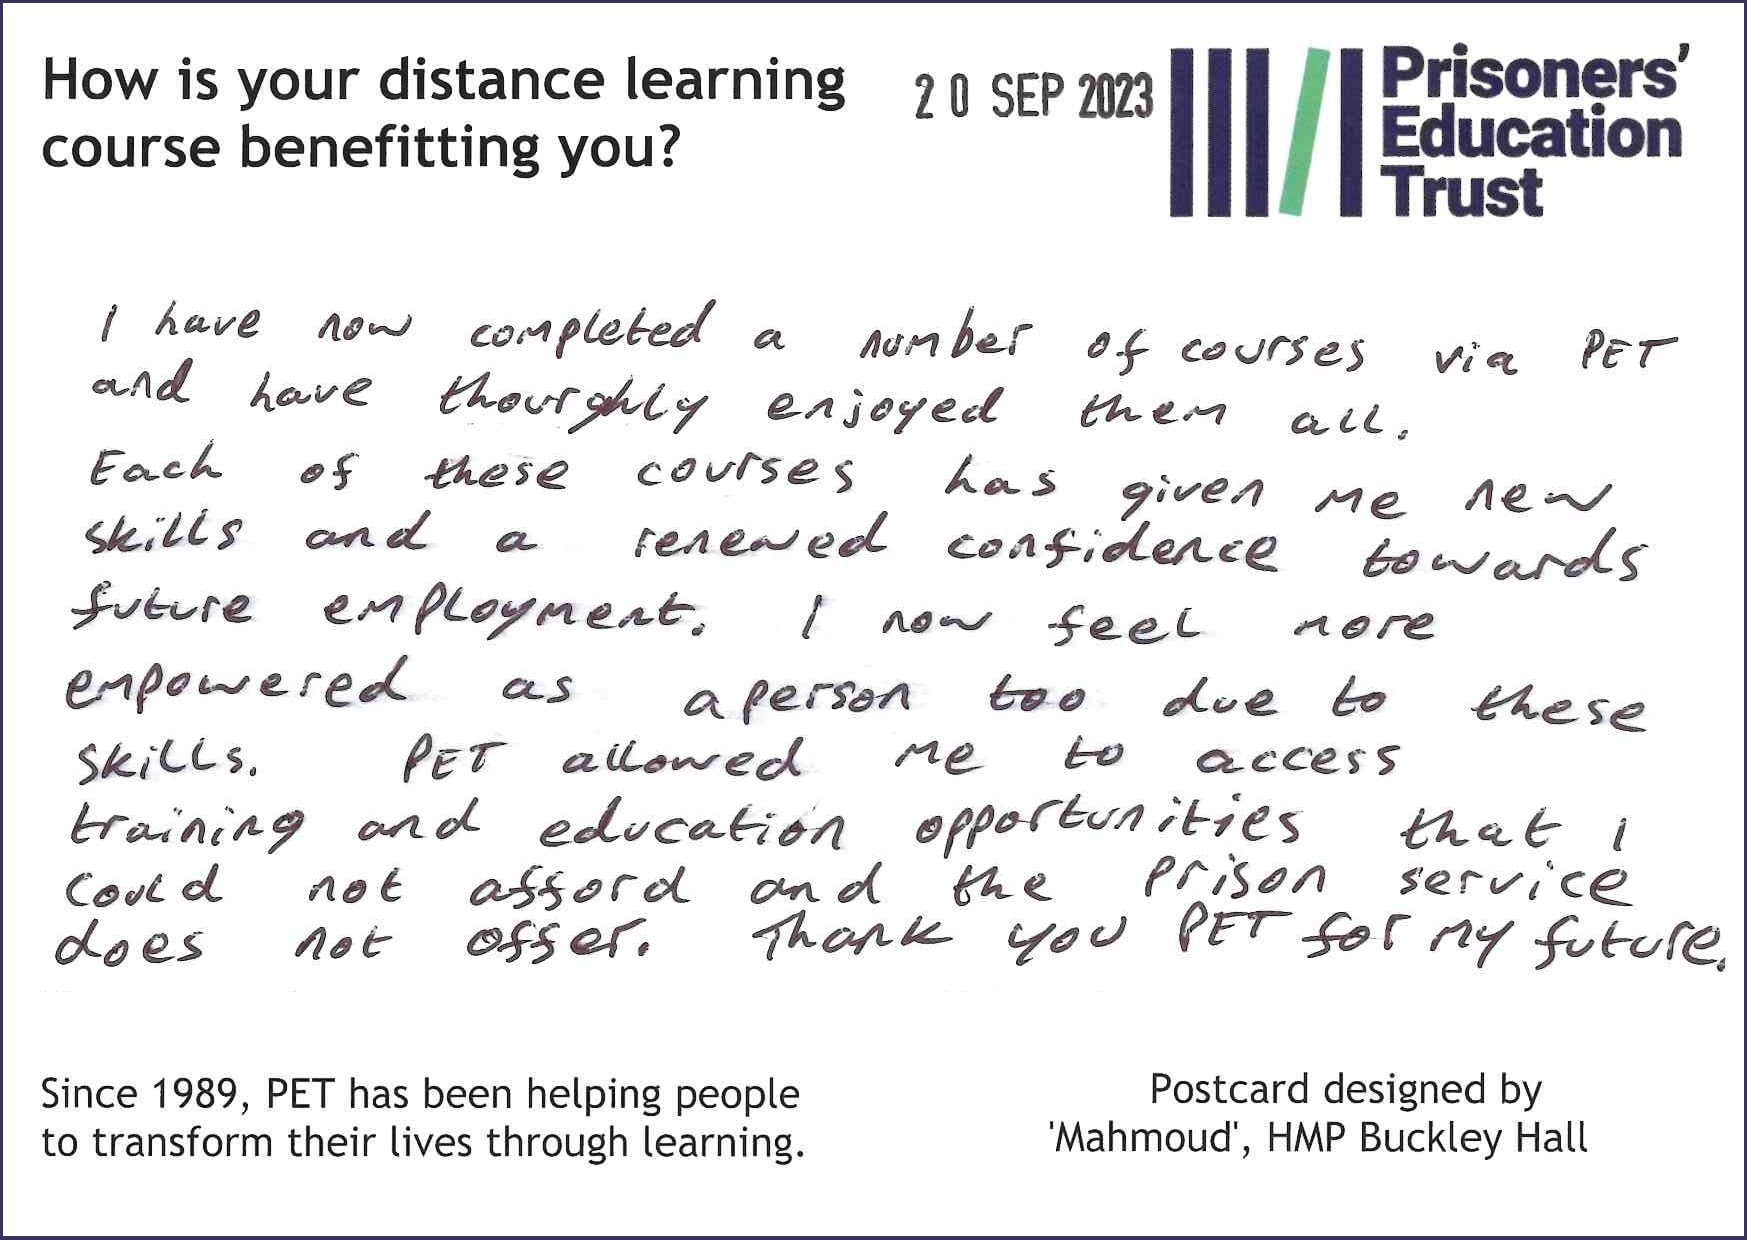 Handwritten quote from learner: "I have now completed a number of courses via PET and have thoroughly enjoyed them all. Each of these courses has given me new skills and a renewed confidence towards future employment. I now feel more empowered as a person too due to these skills. PET allowed me to access training and education opportunities that I could not afford and the prison service does not offer. Thank you PET for my future."